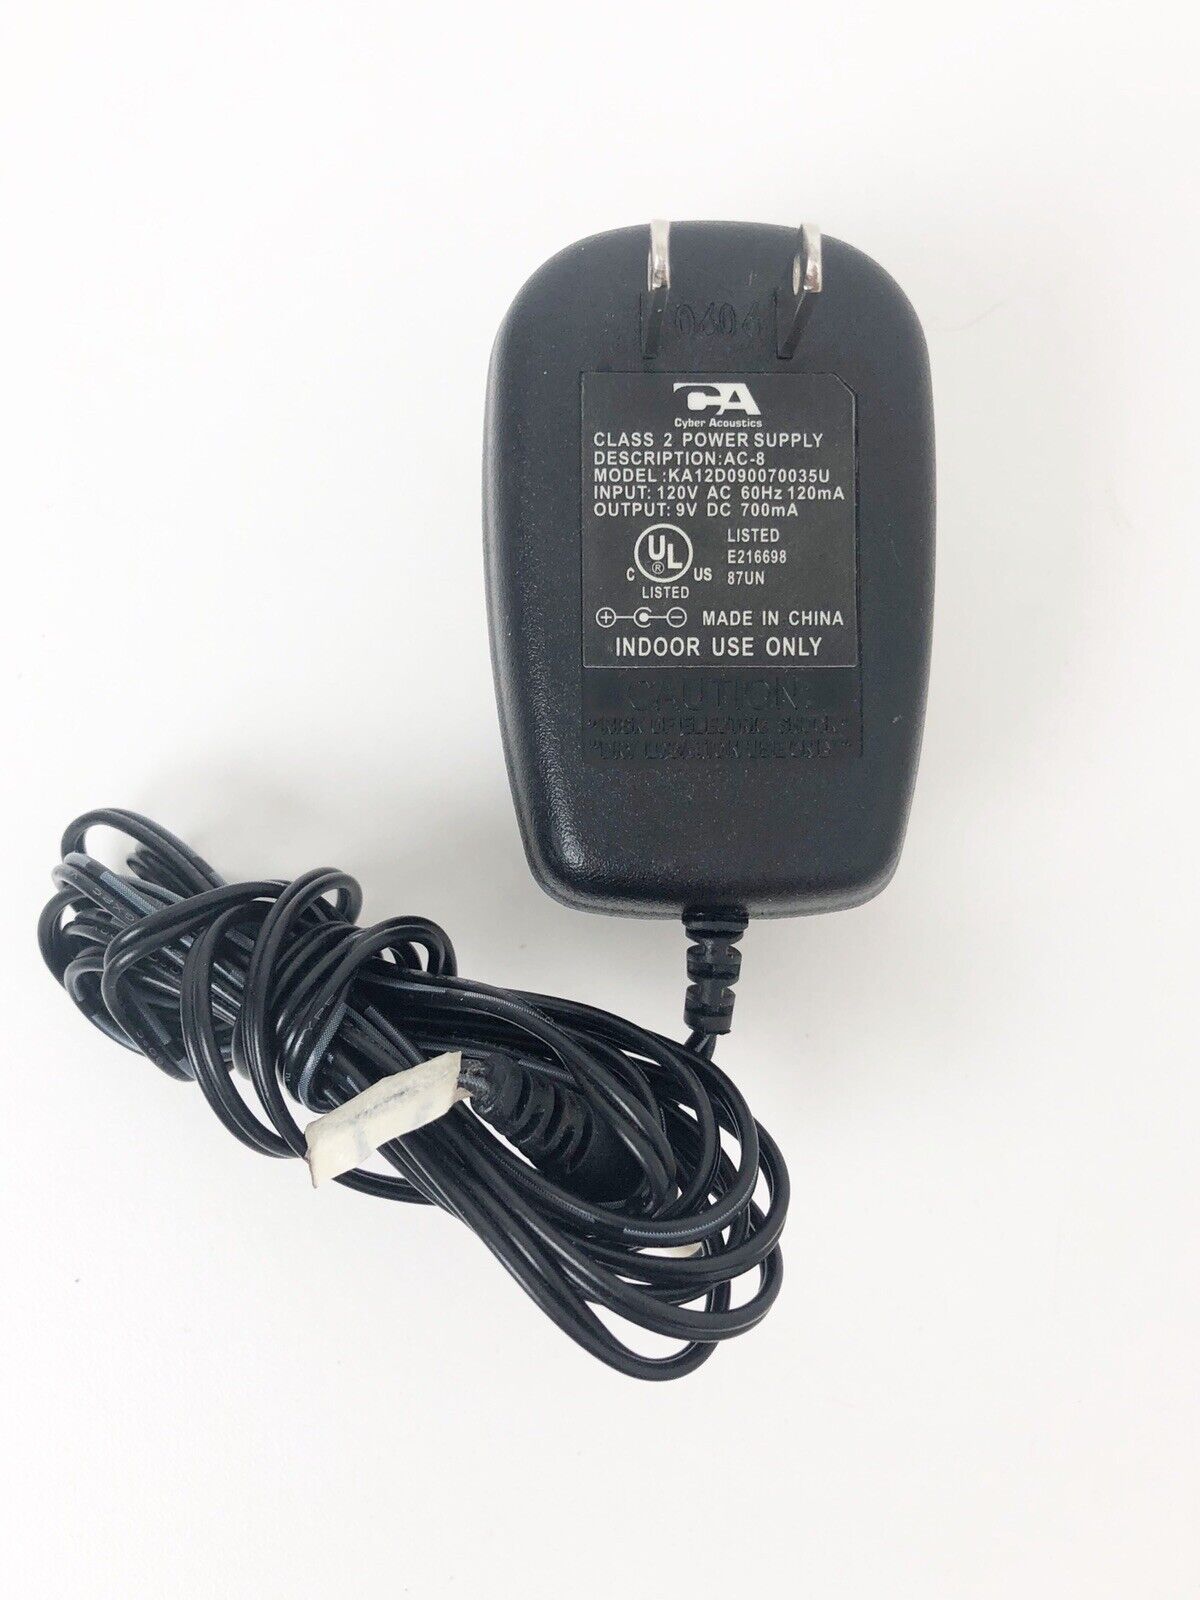 *Brand NEW* Charger 9 Volts 700mA Cyber Acoustics KA12D090070035u AC Adapter Power Supply - Click Image to Close